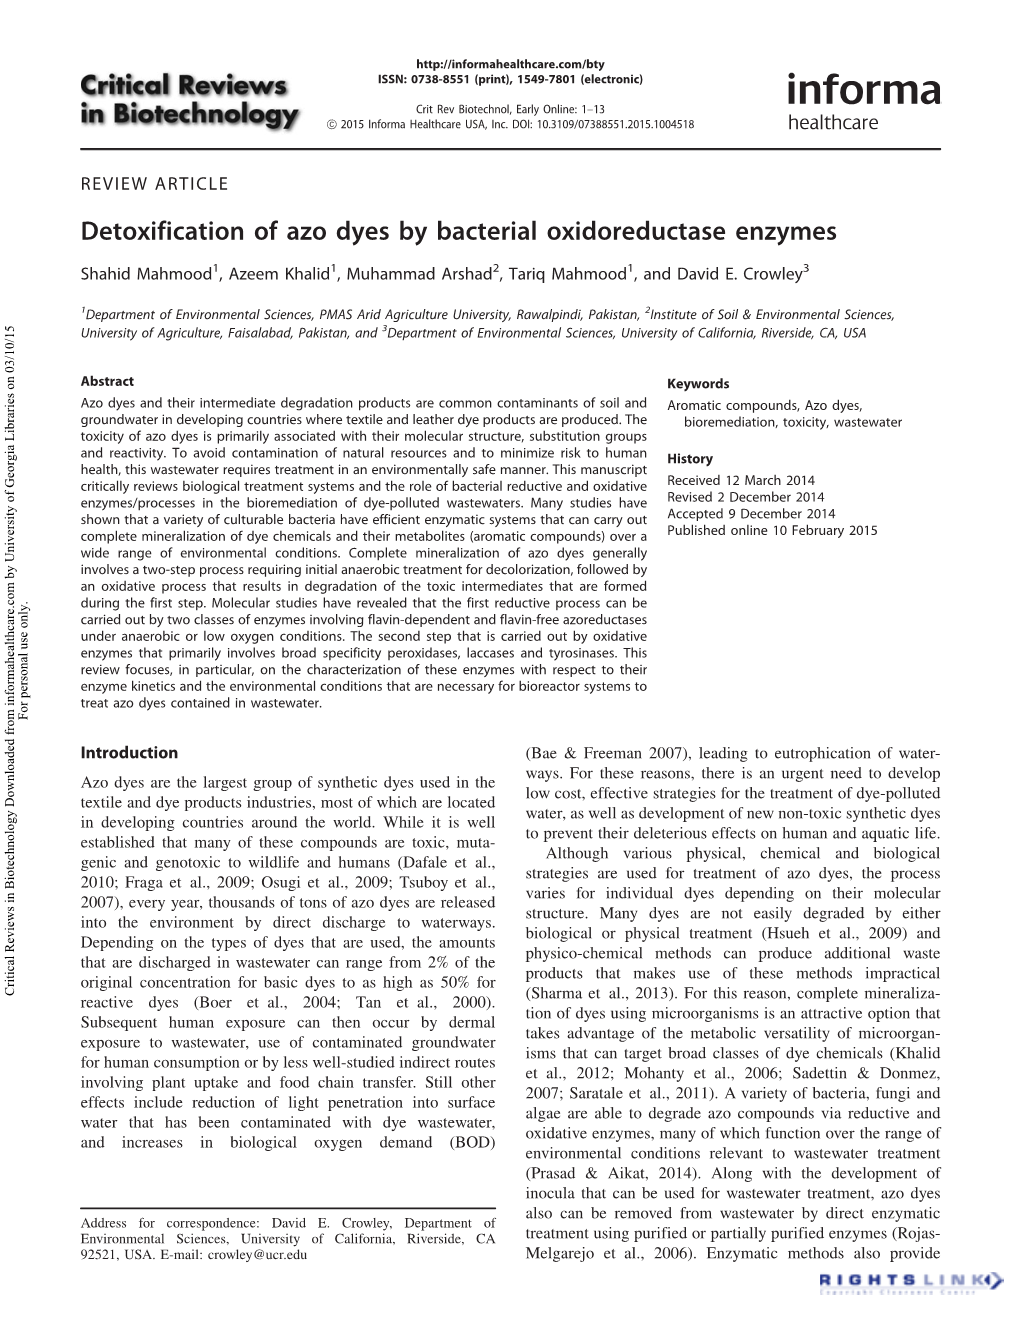 Detoxification of Azo Dyes by Bacterial Oxidoreductase Enzymes